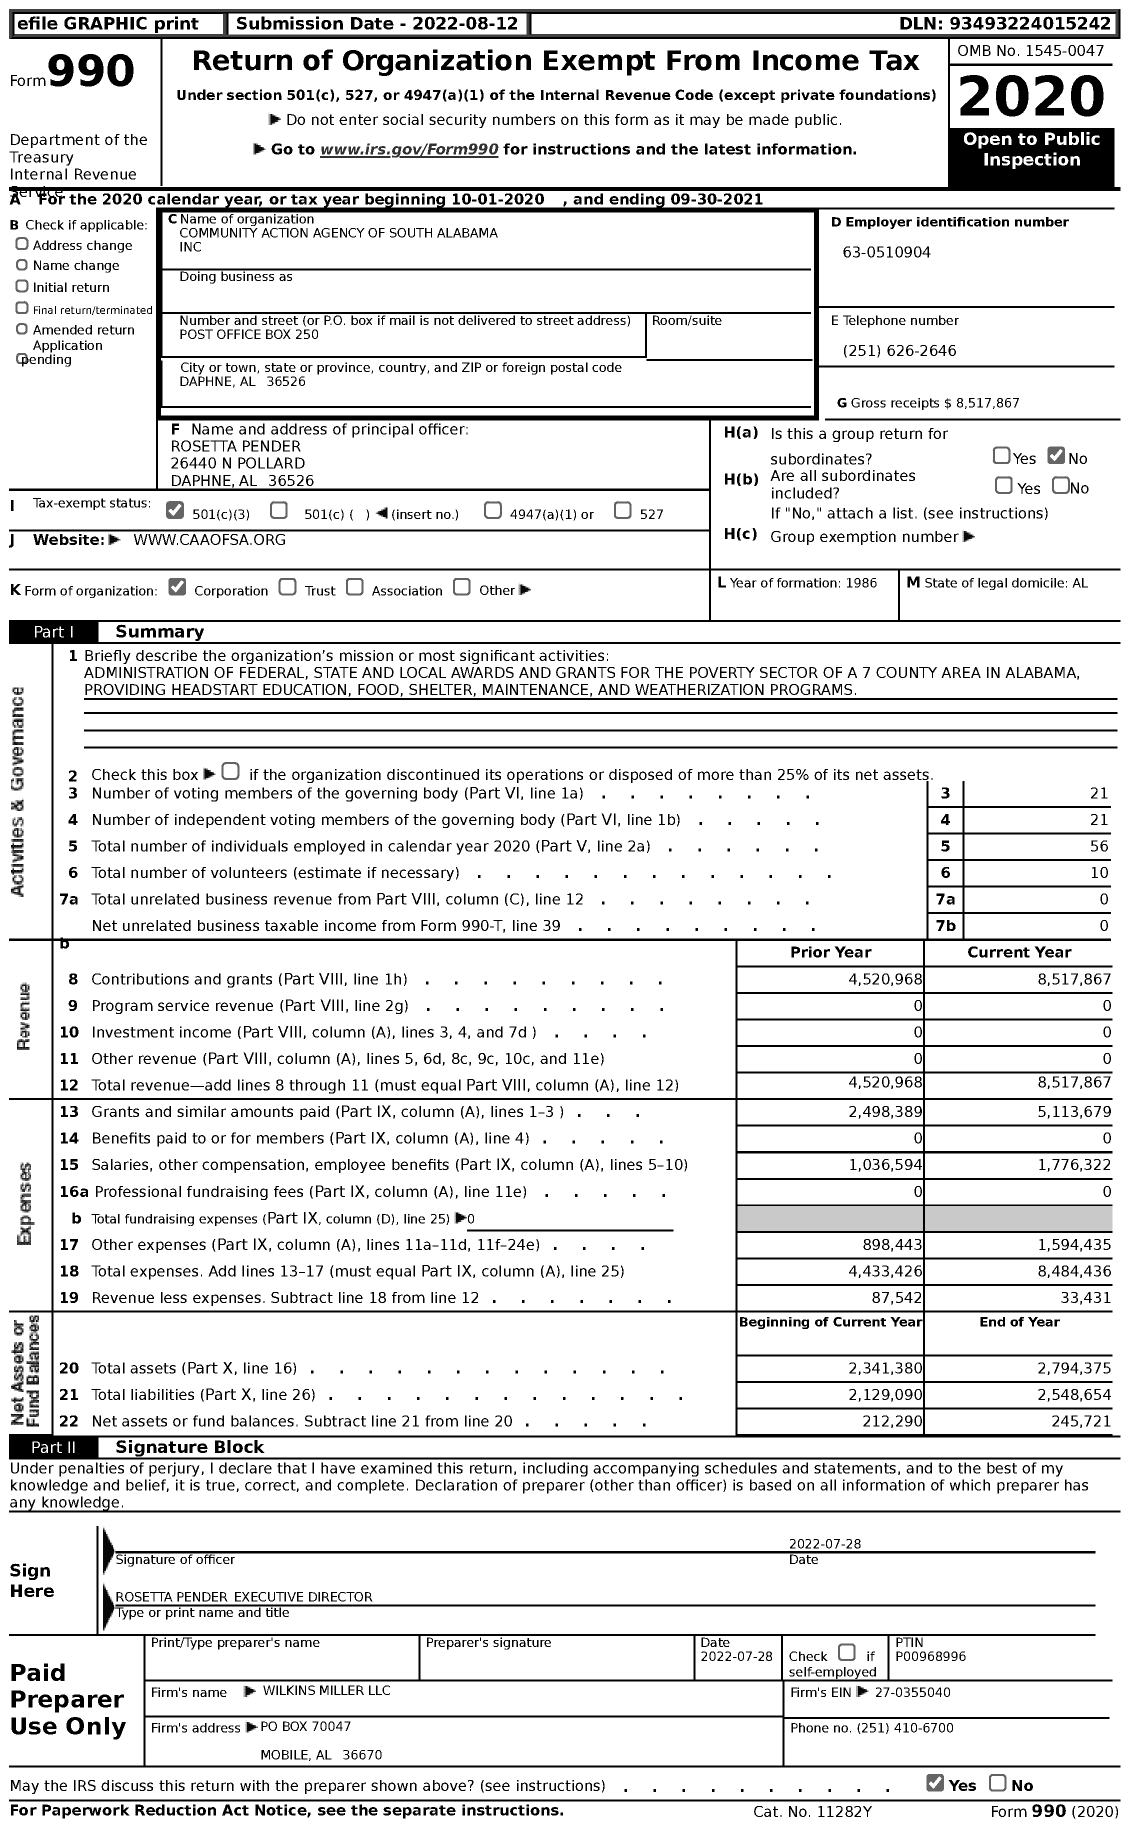 Image of first page of 2020 Form 990 for Community Action Agency of South Alabama